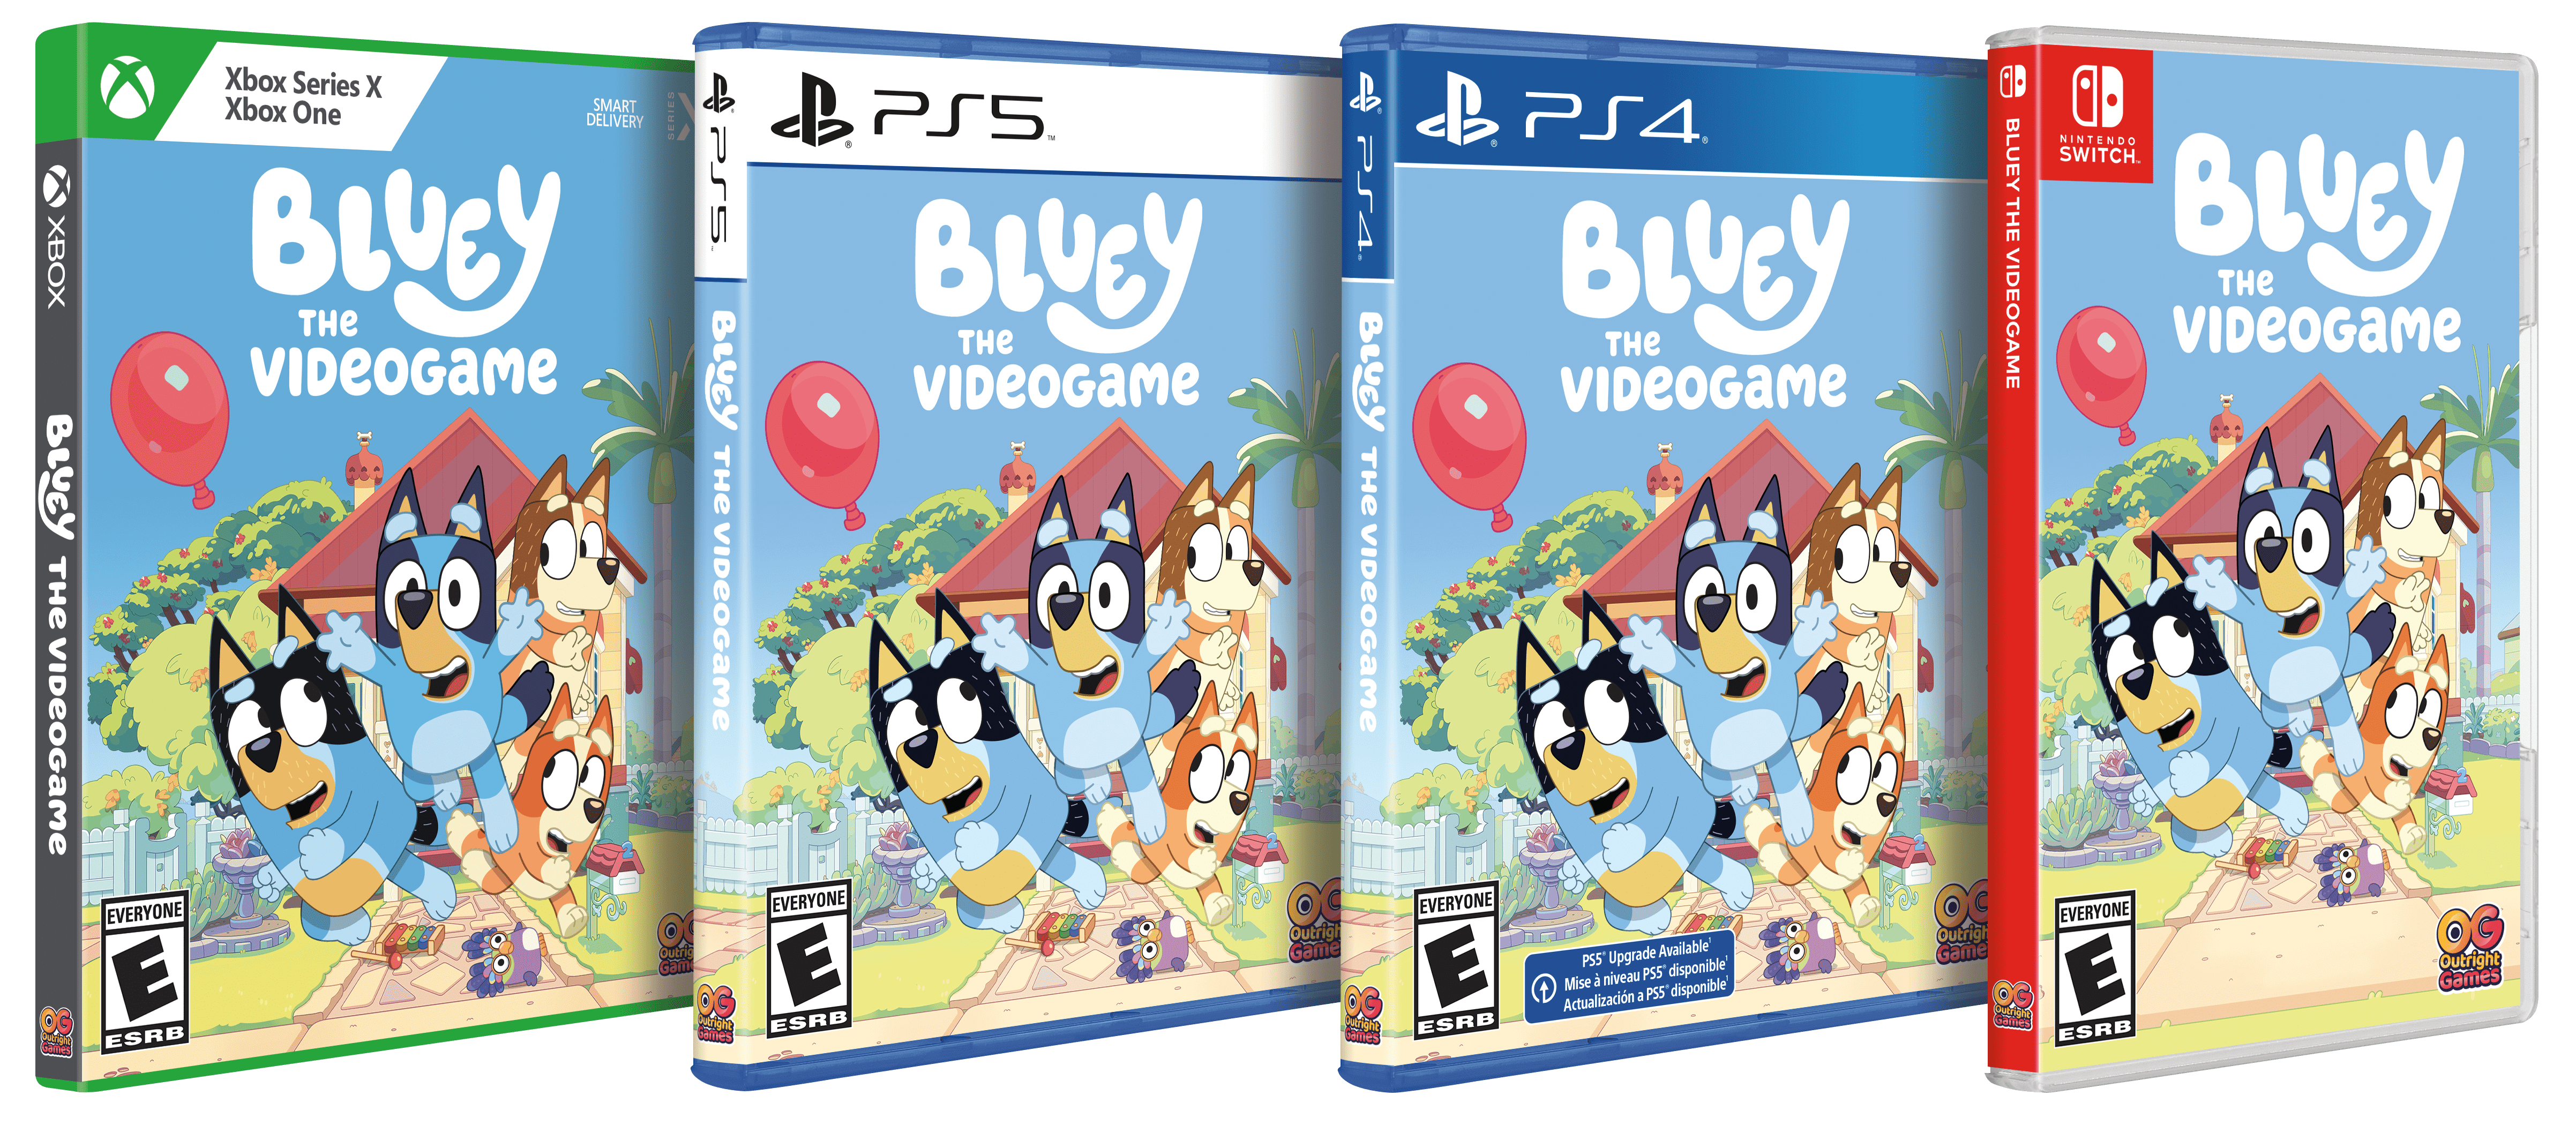 NEW Bluey Video Game Now Available for Pre-Order (Switch